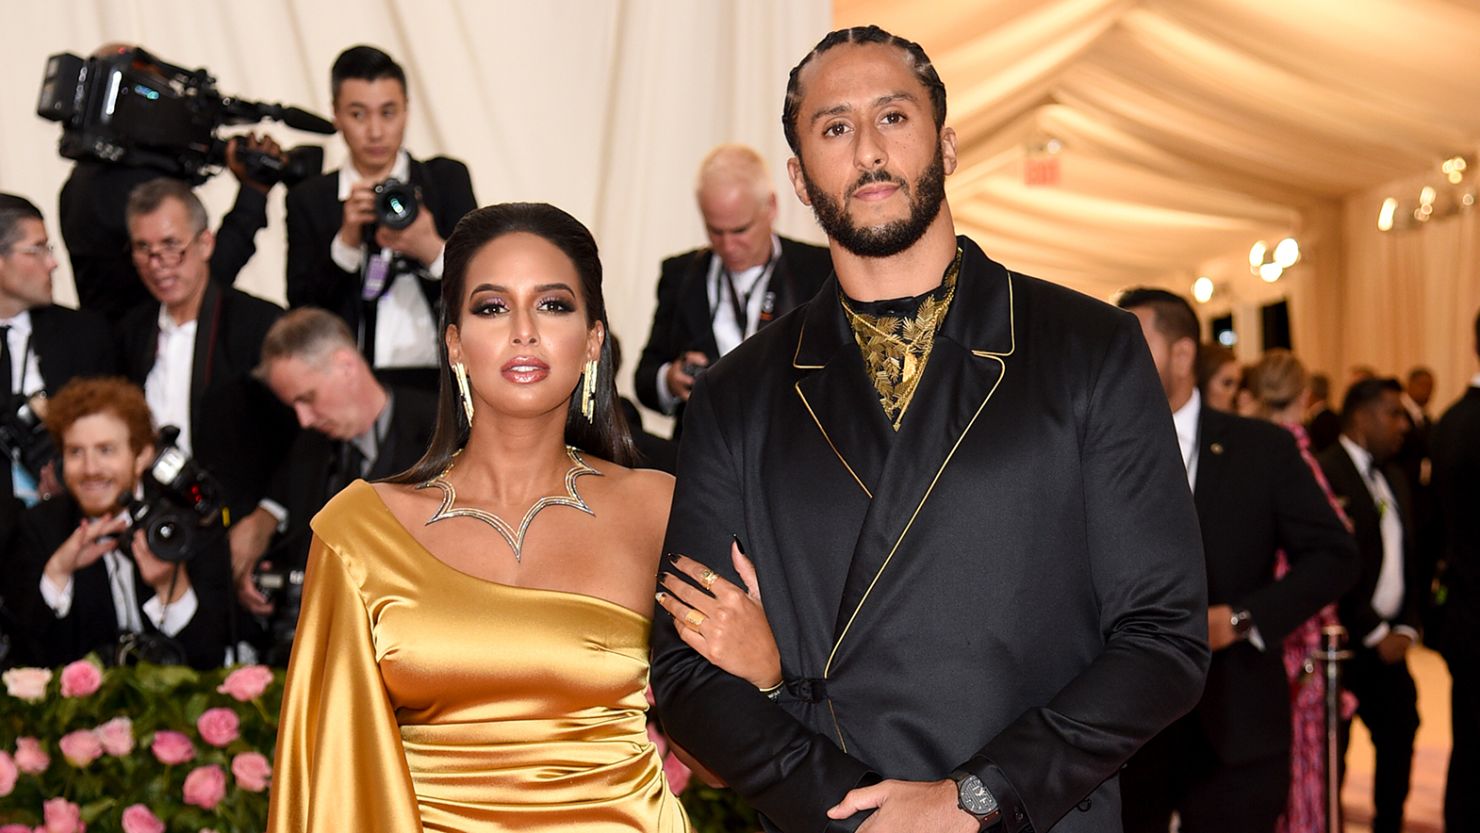 Colin Kaepernick, left, and girlfriend Nessa Diab attend The Metropolitan Museum of Art's Costume Institute benefit gala celebrating the opening of the "Camp: Notes on Fashion" exhibition on Monday, May 6, 2019, in New York. 